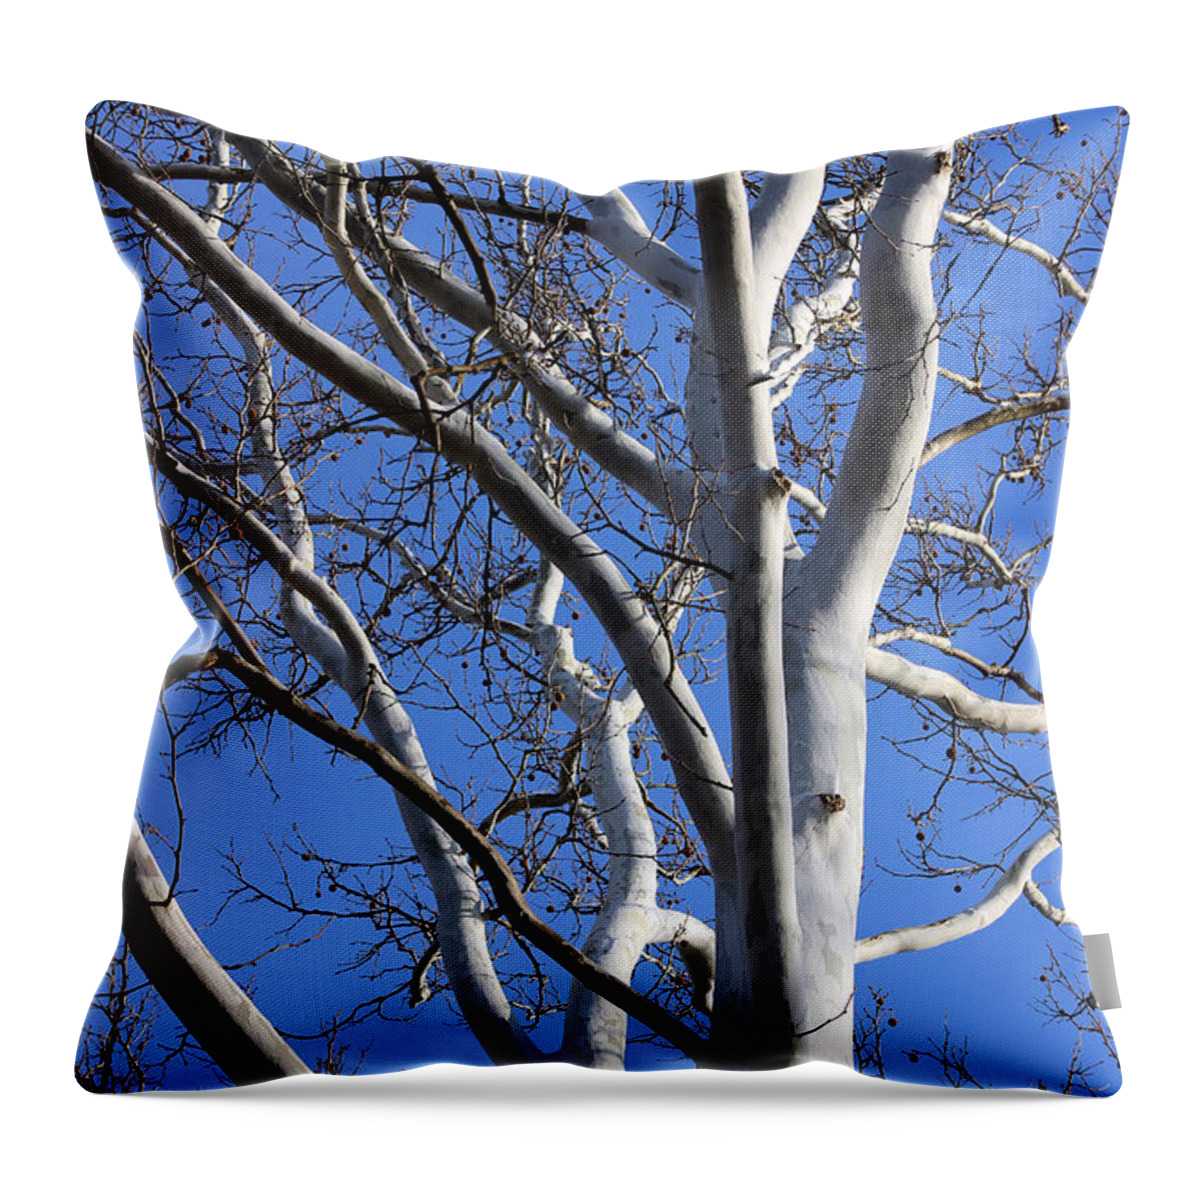 Sycamore Throw Pillow featuring the photograph Sycamore Tree with Blue Winter Sky by Karen Adams